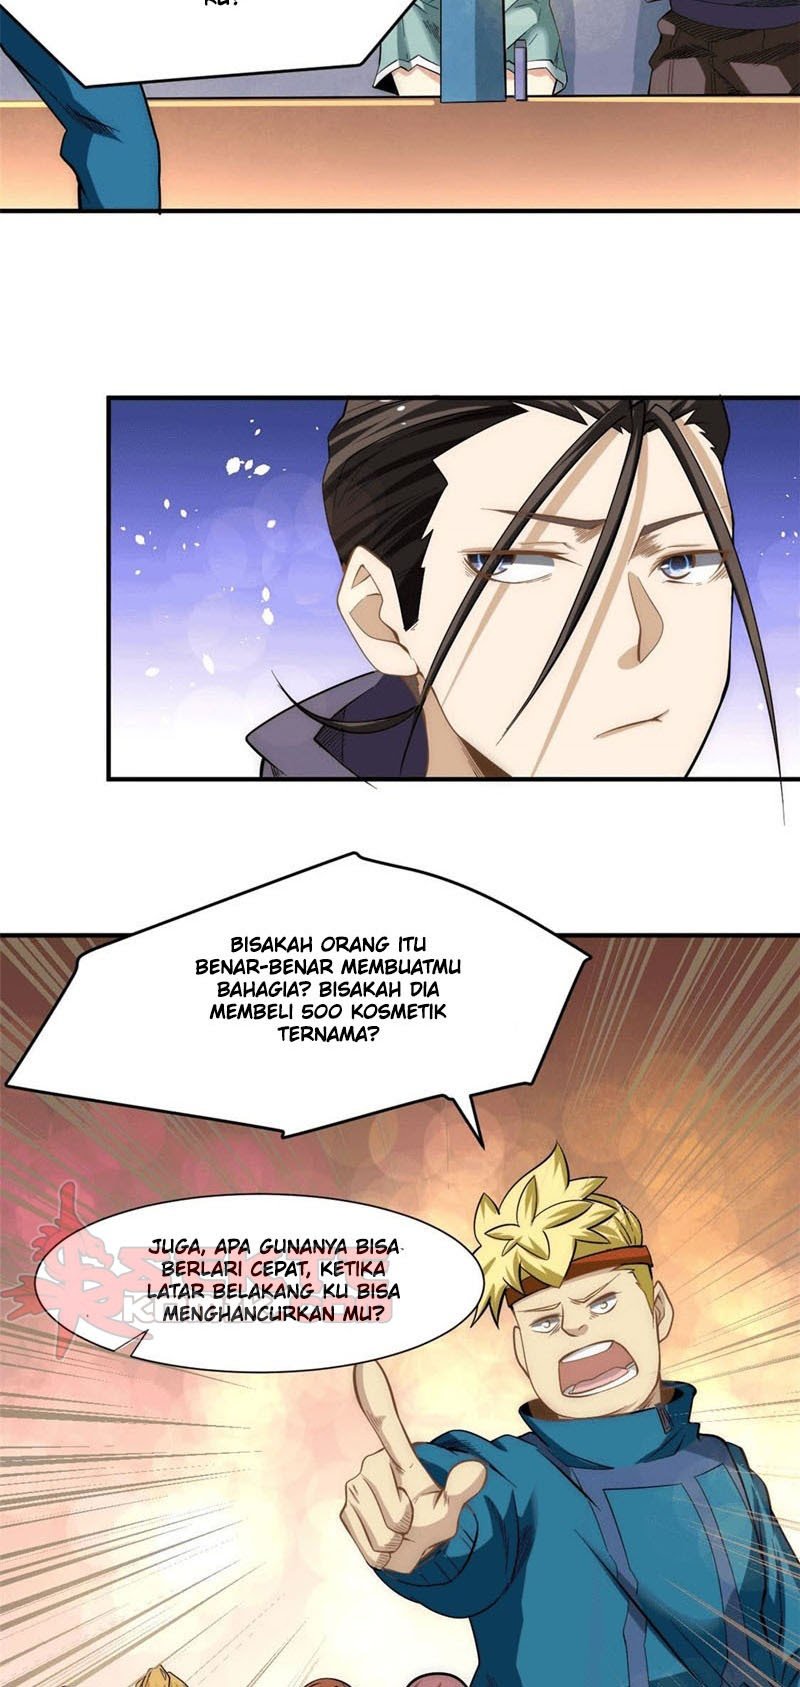 Almighty Master Chapter 41